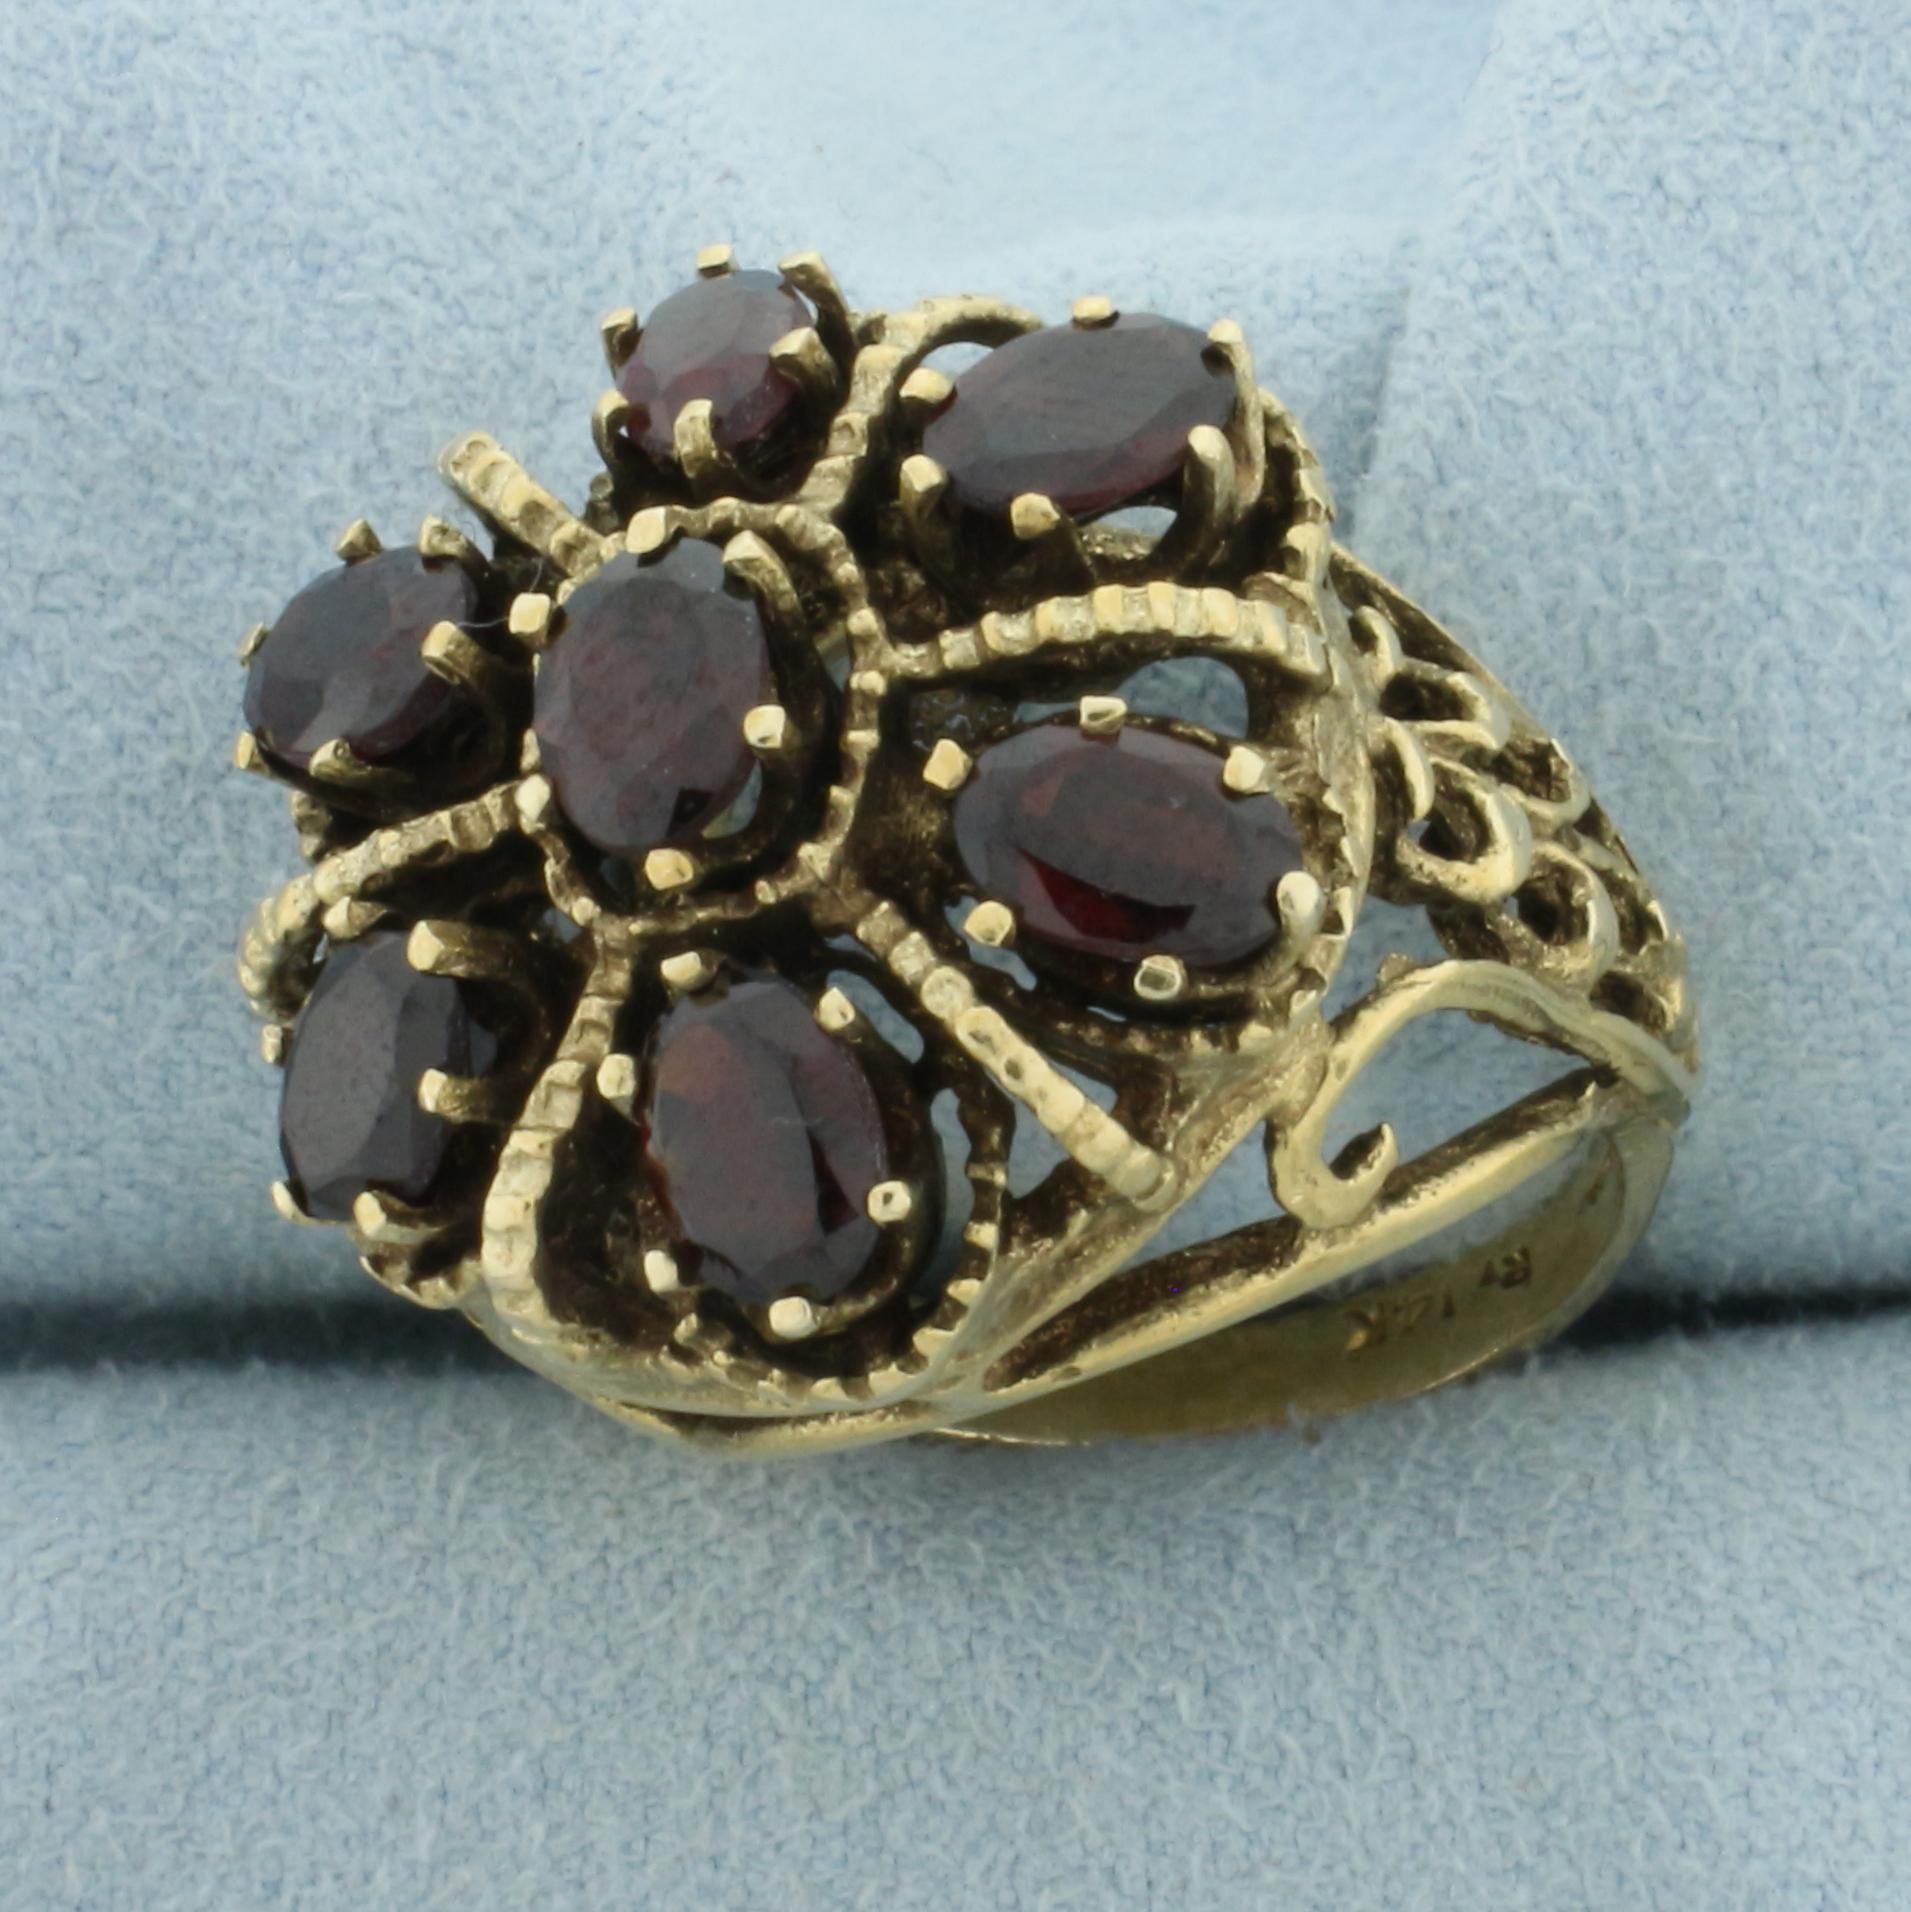 Garnet Cluster Victorian Revival Ring In 14k Yellow Gold